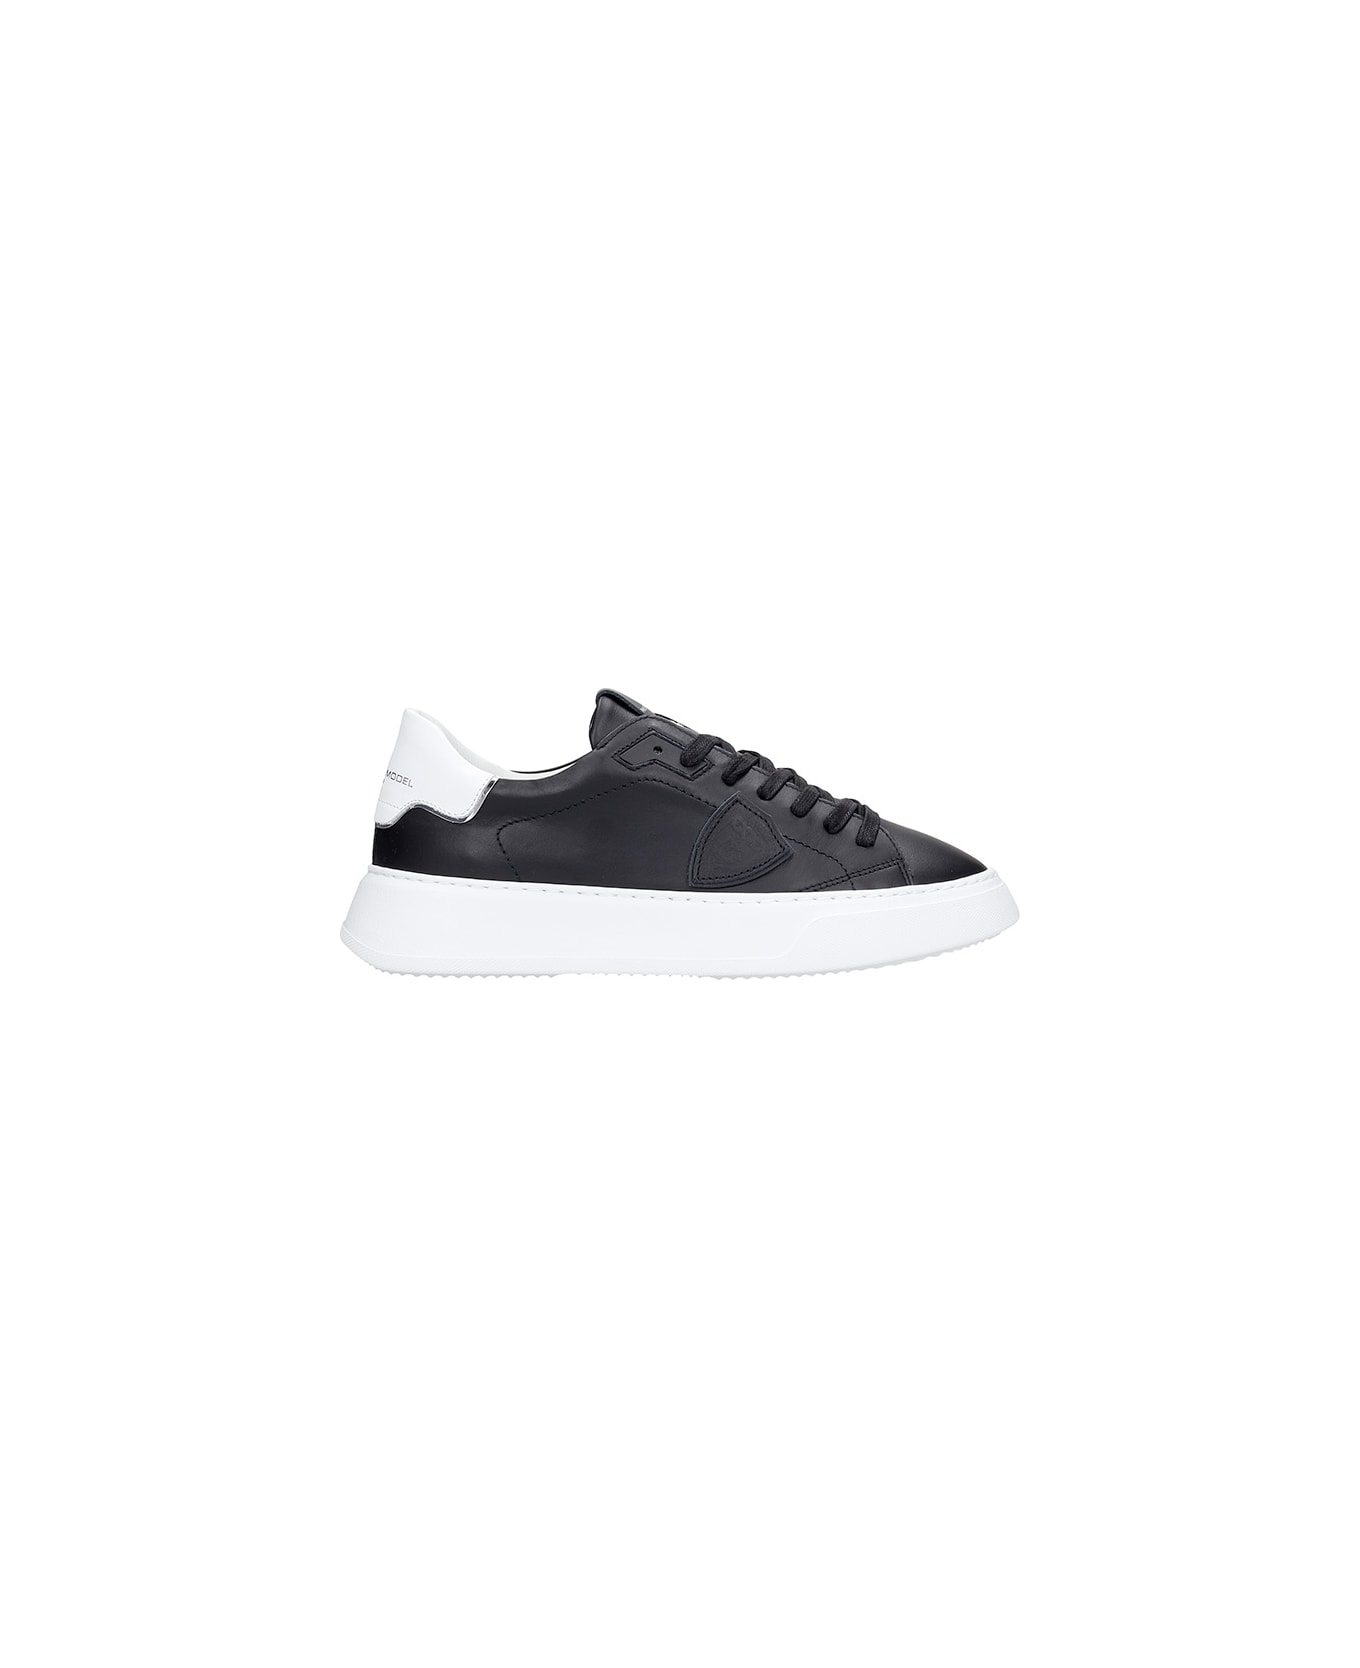 Philippe Model Temple L Sneakers In Black Leather - Black